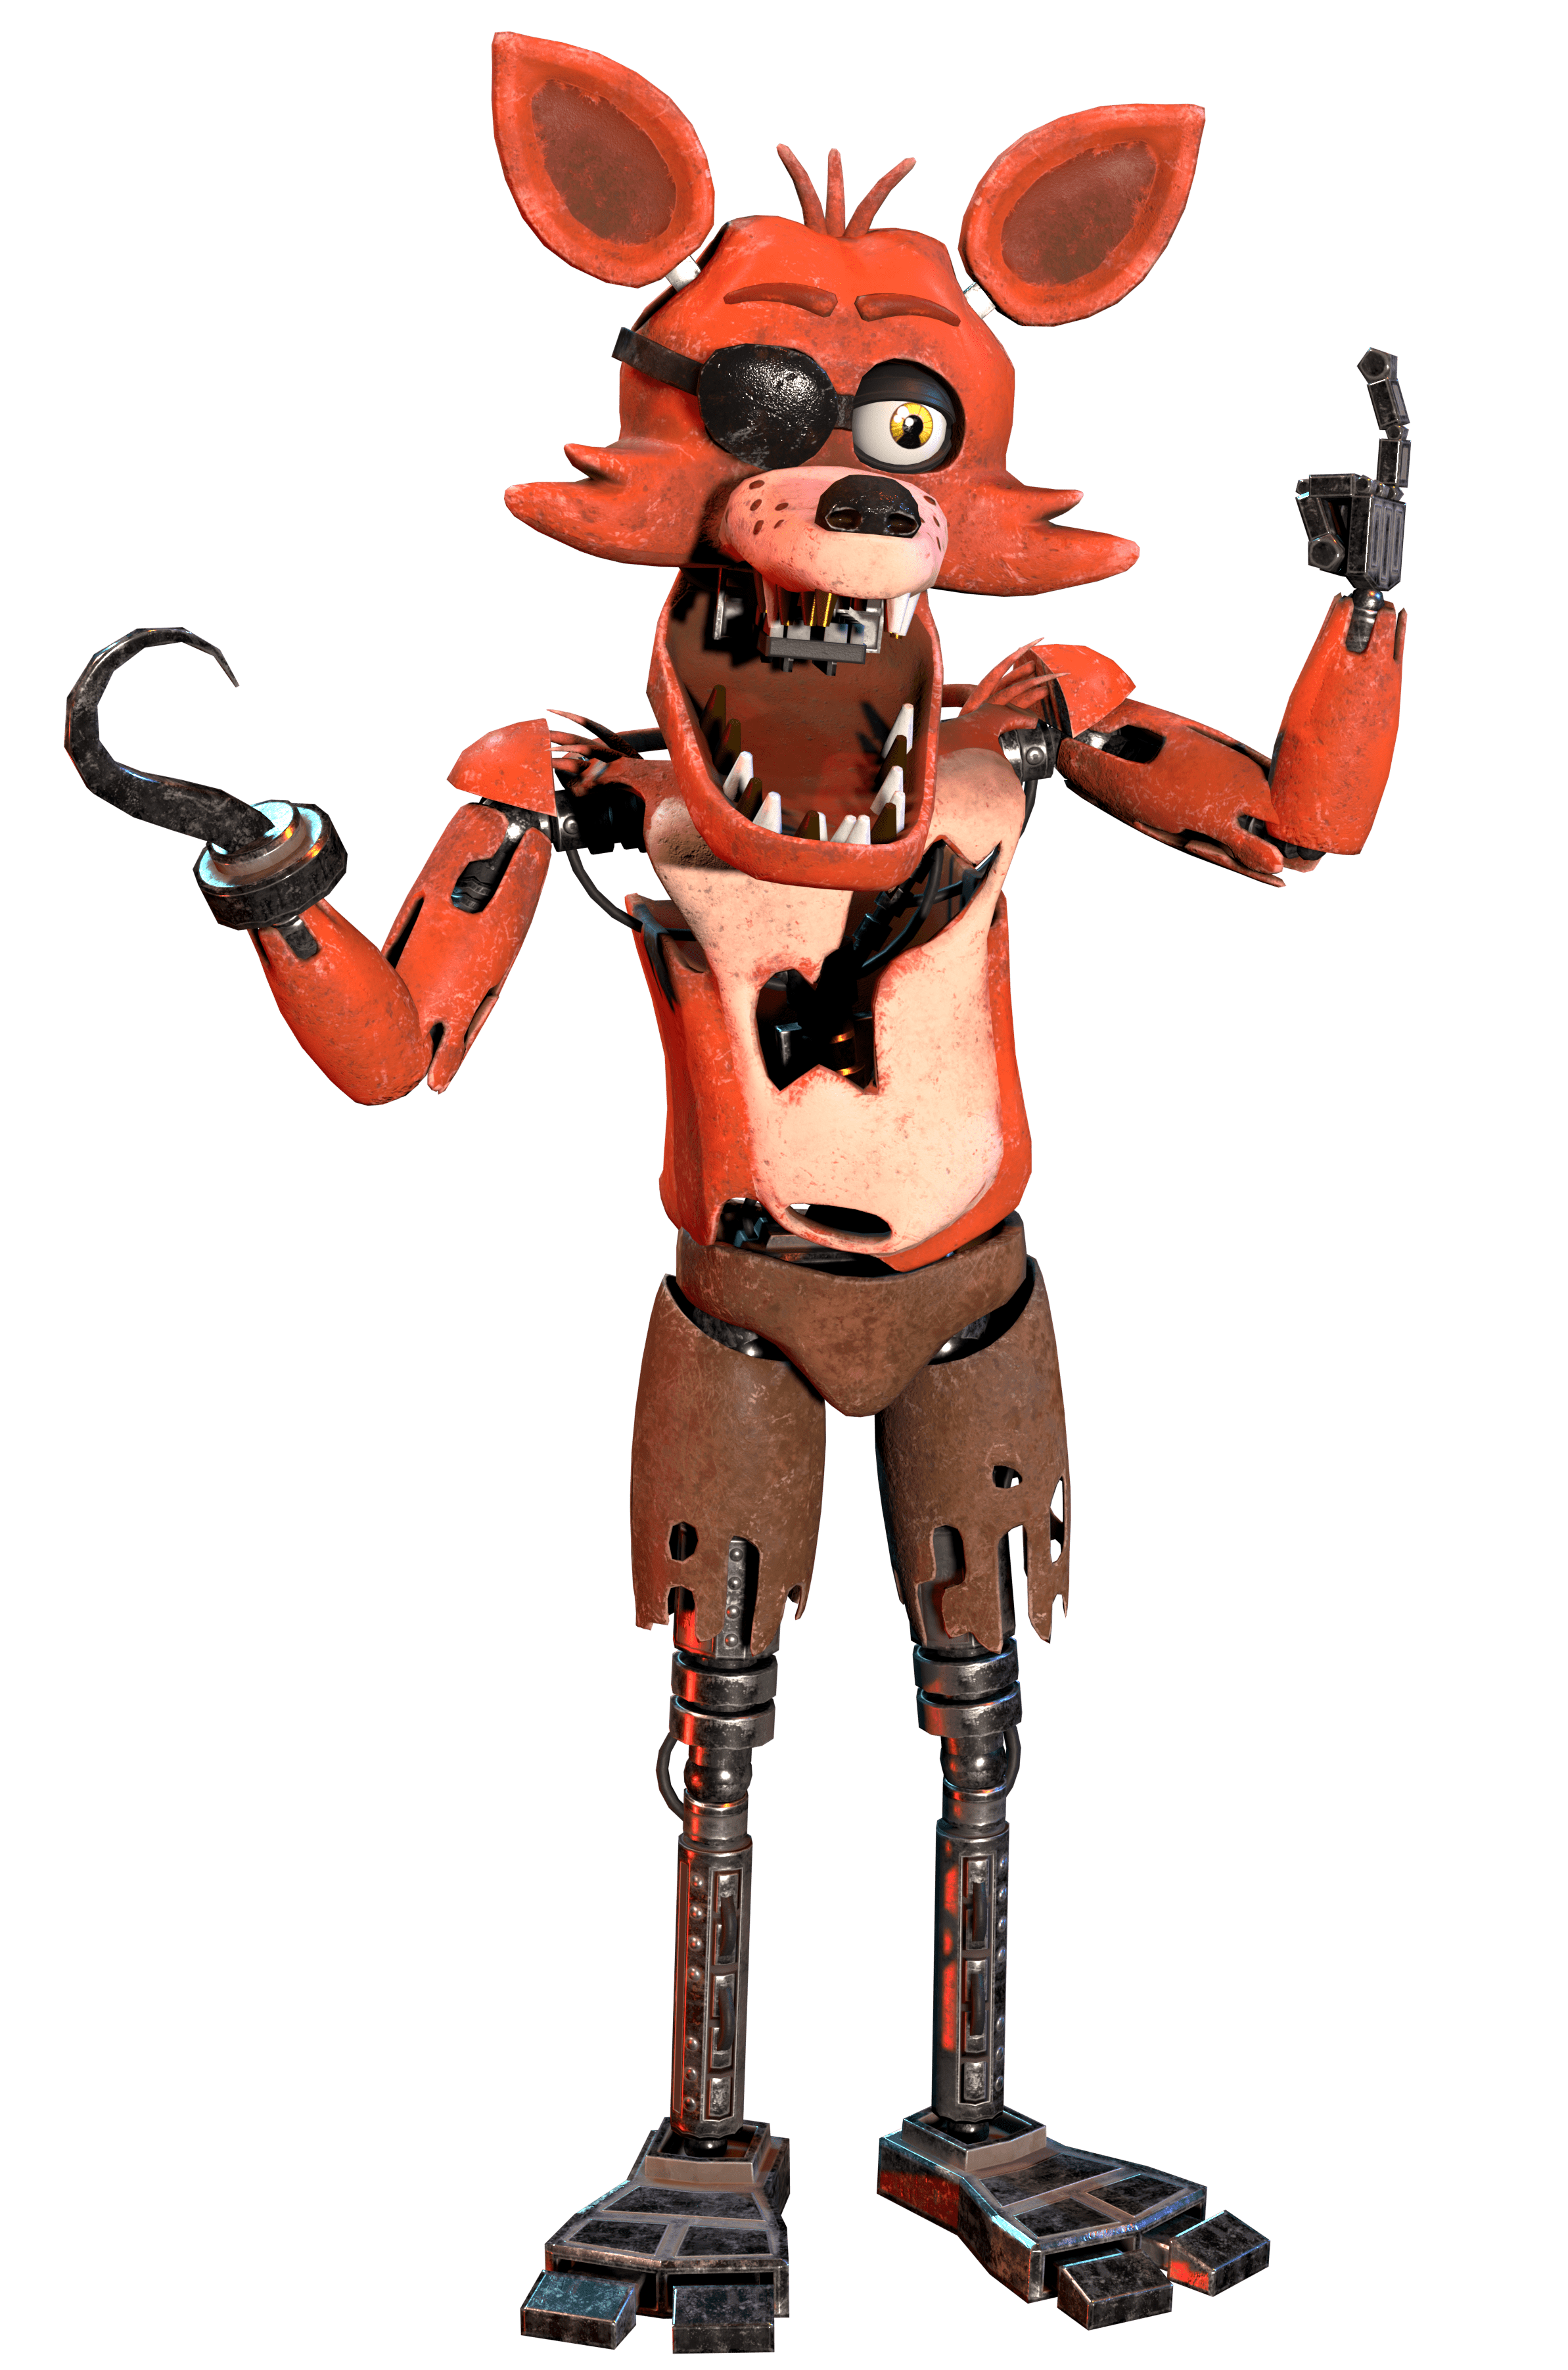 angela pearce recommends Pics Of Foxy From Five Nights At Freddys